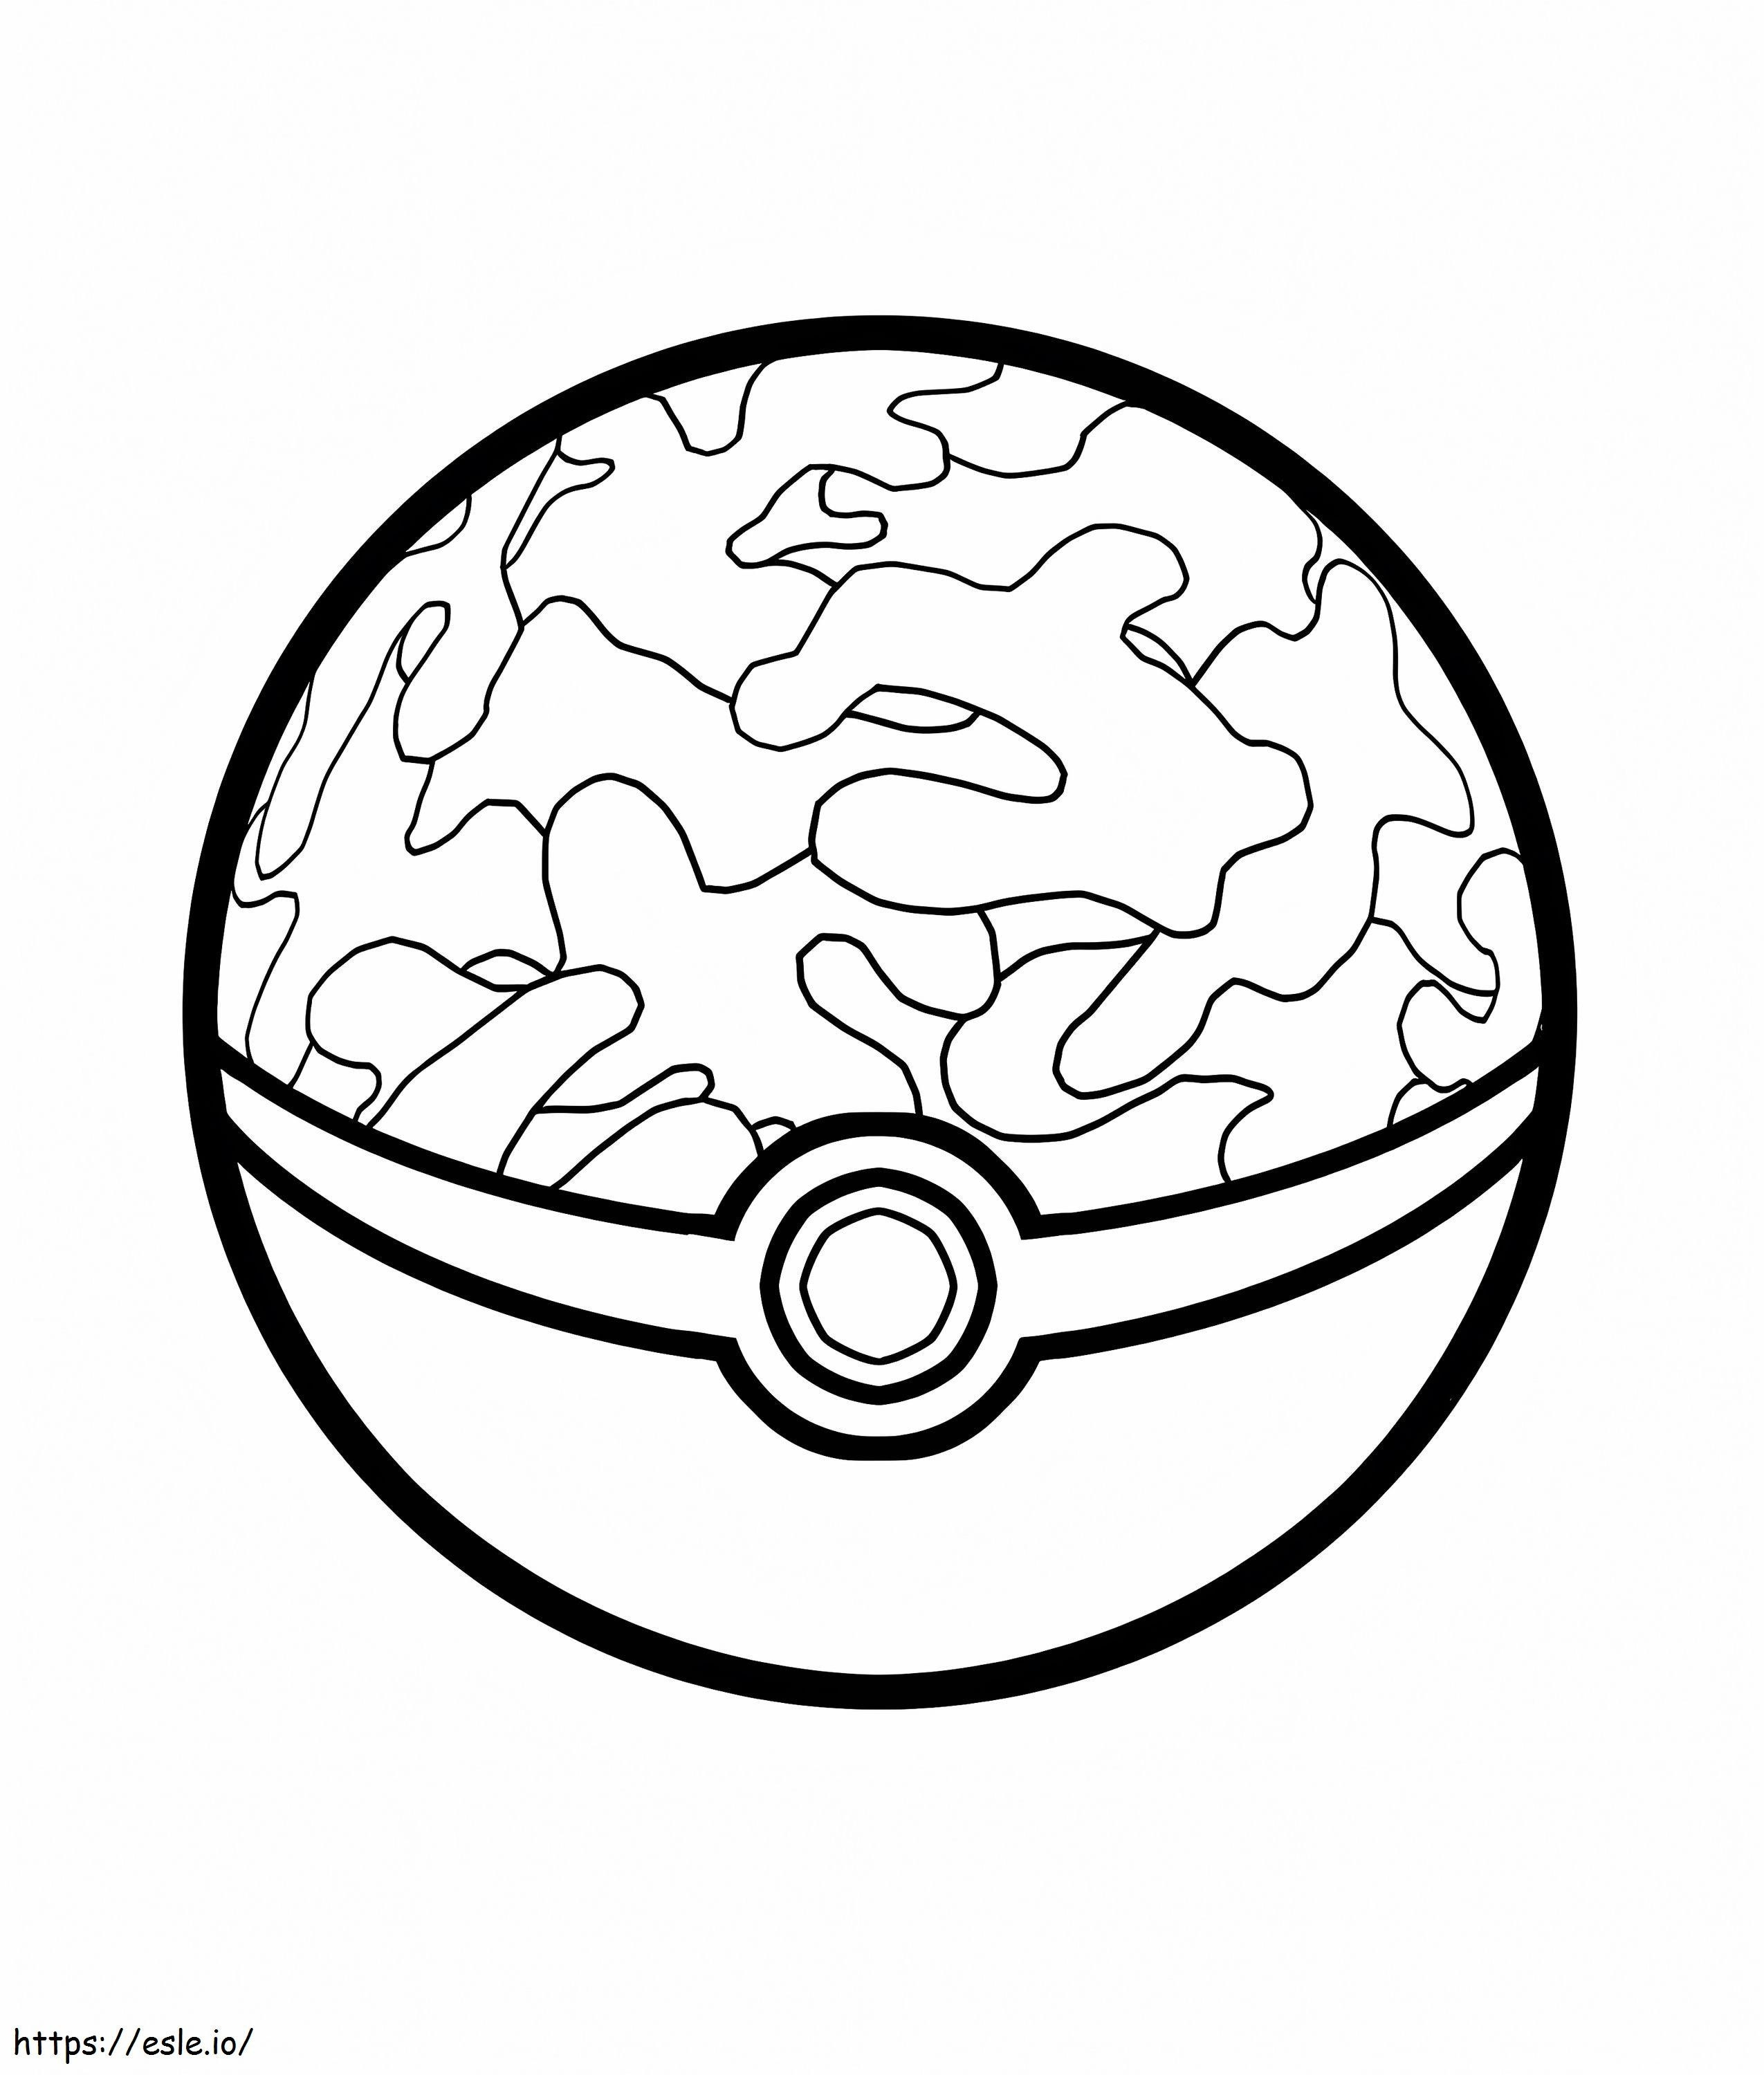 Awesome Pokemon coloring page